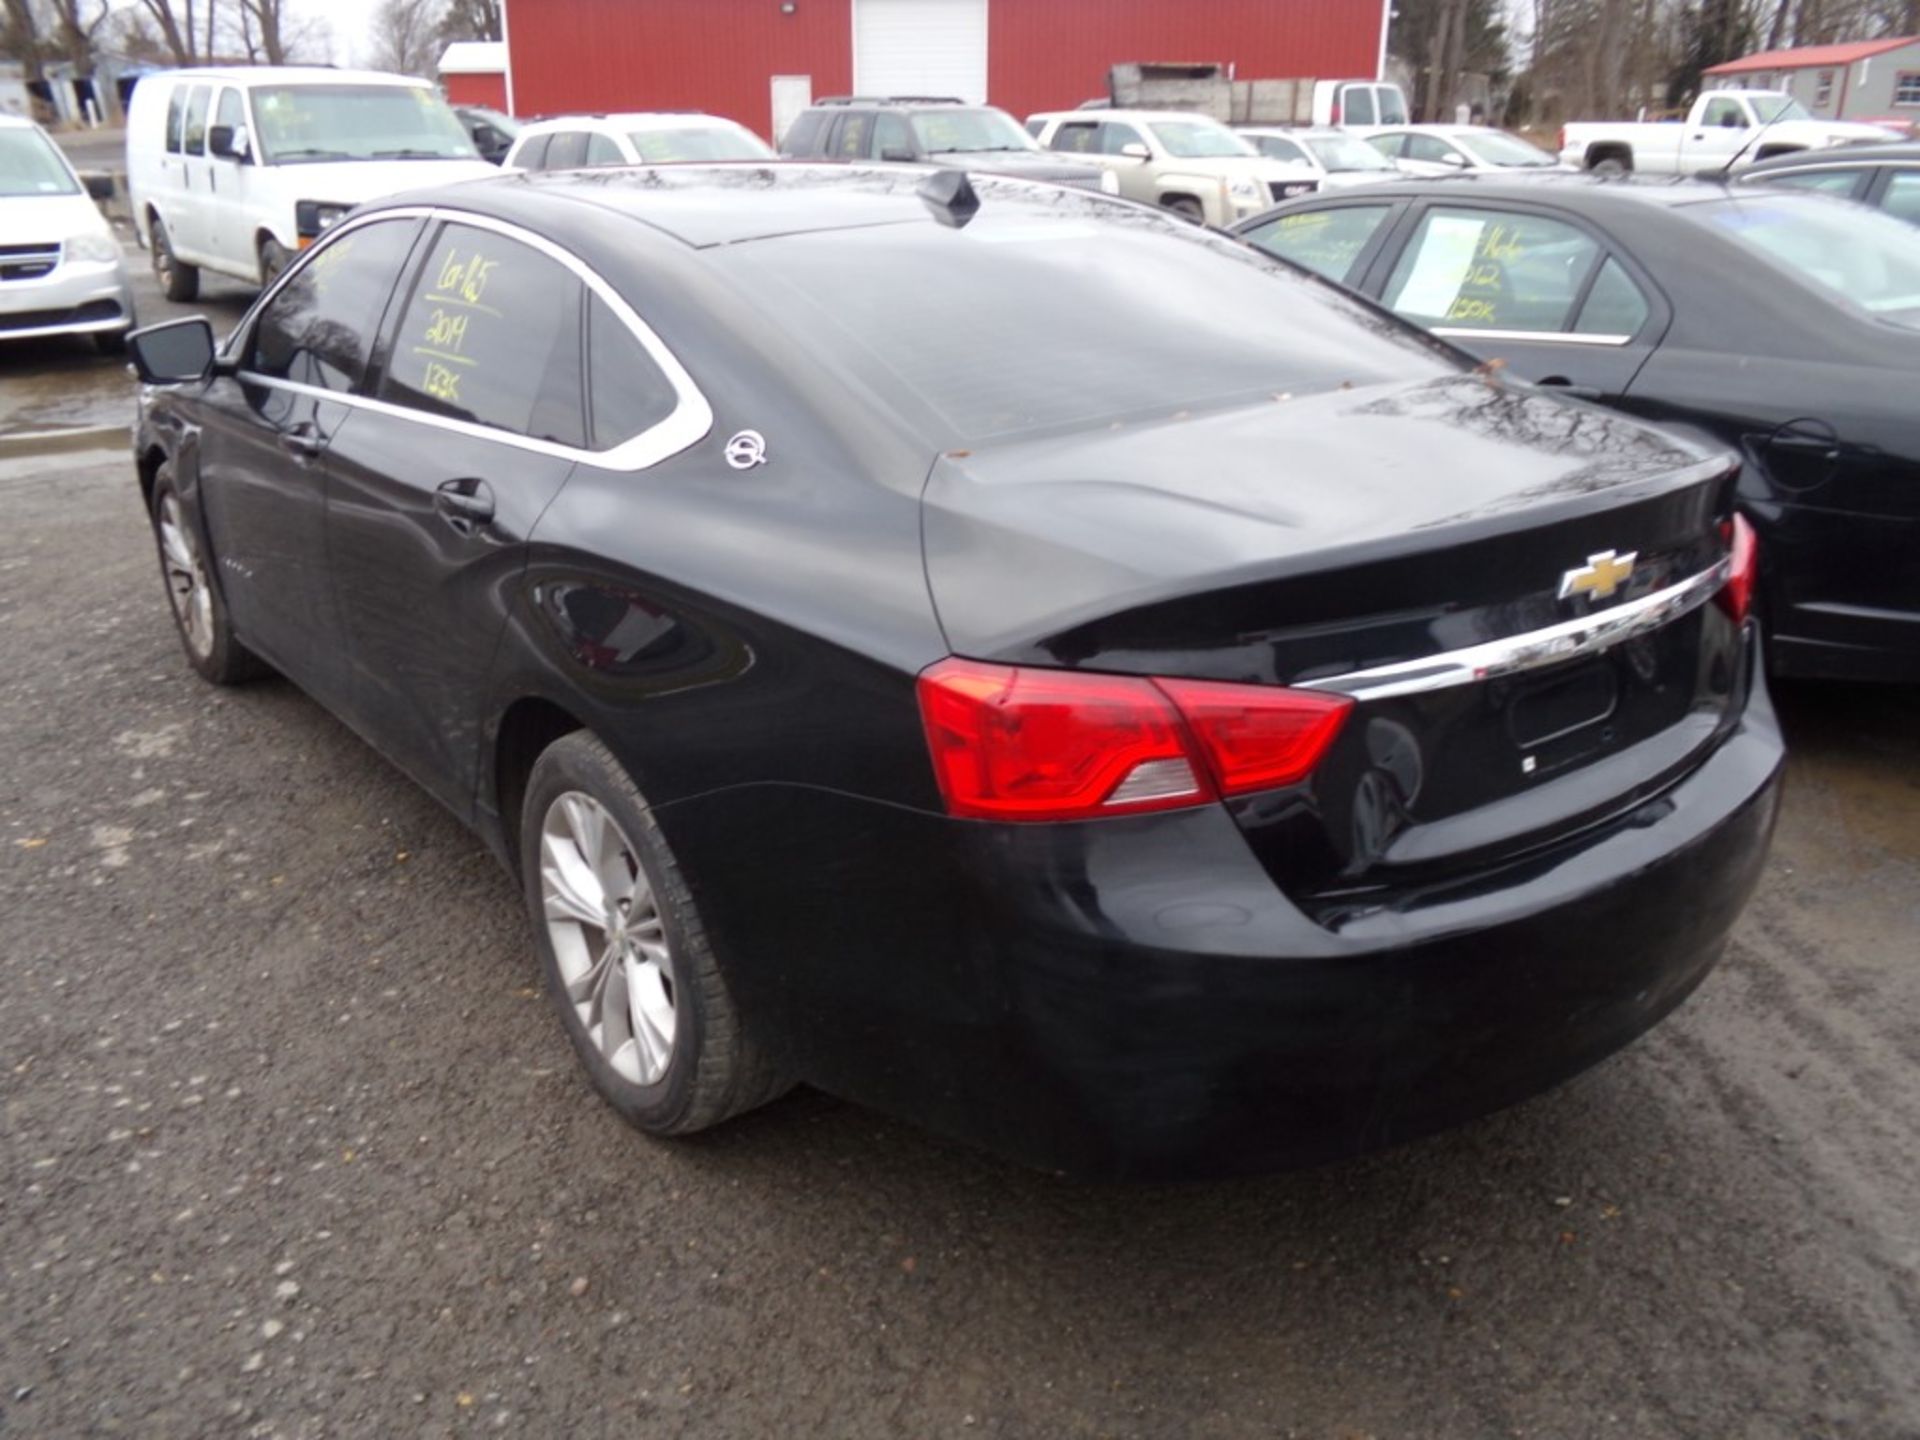 2014 Chevrolet Impala LT, Leather, Windows Are Tinted, Includig Front Windshield, Black, 133,313 - Image 2 of 6